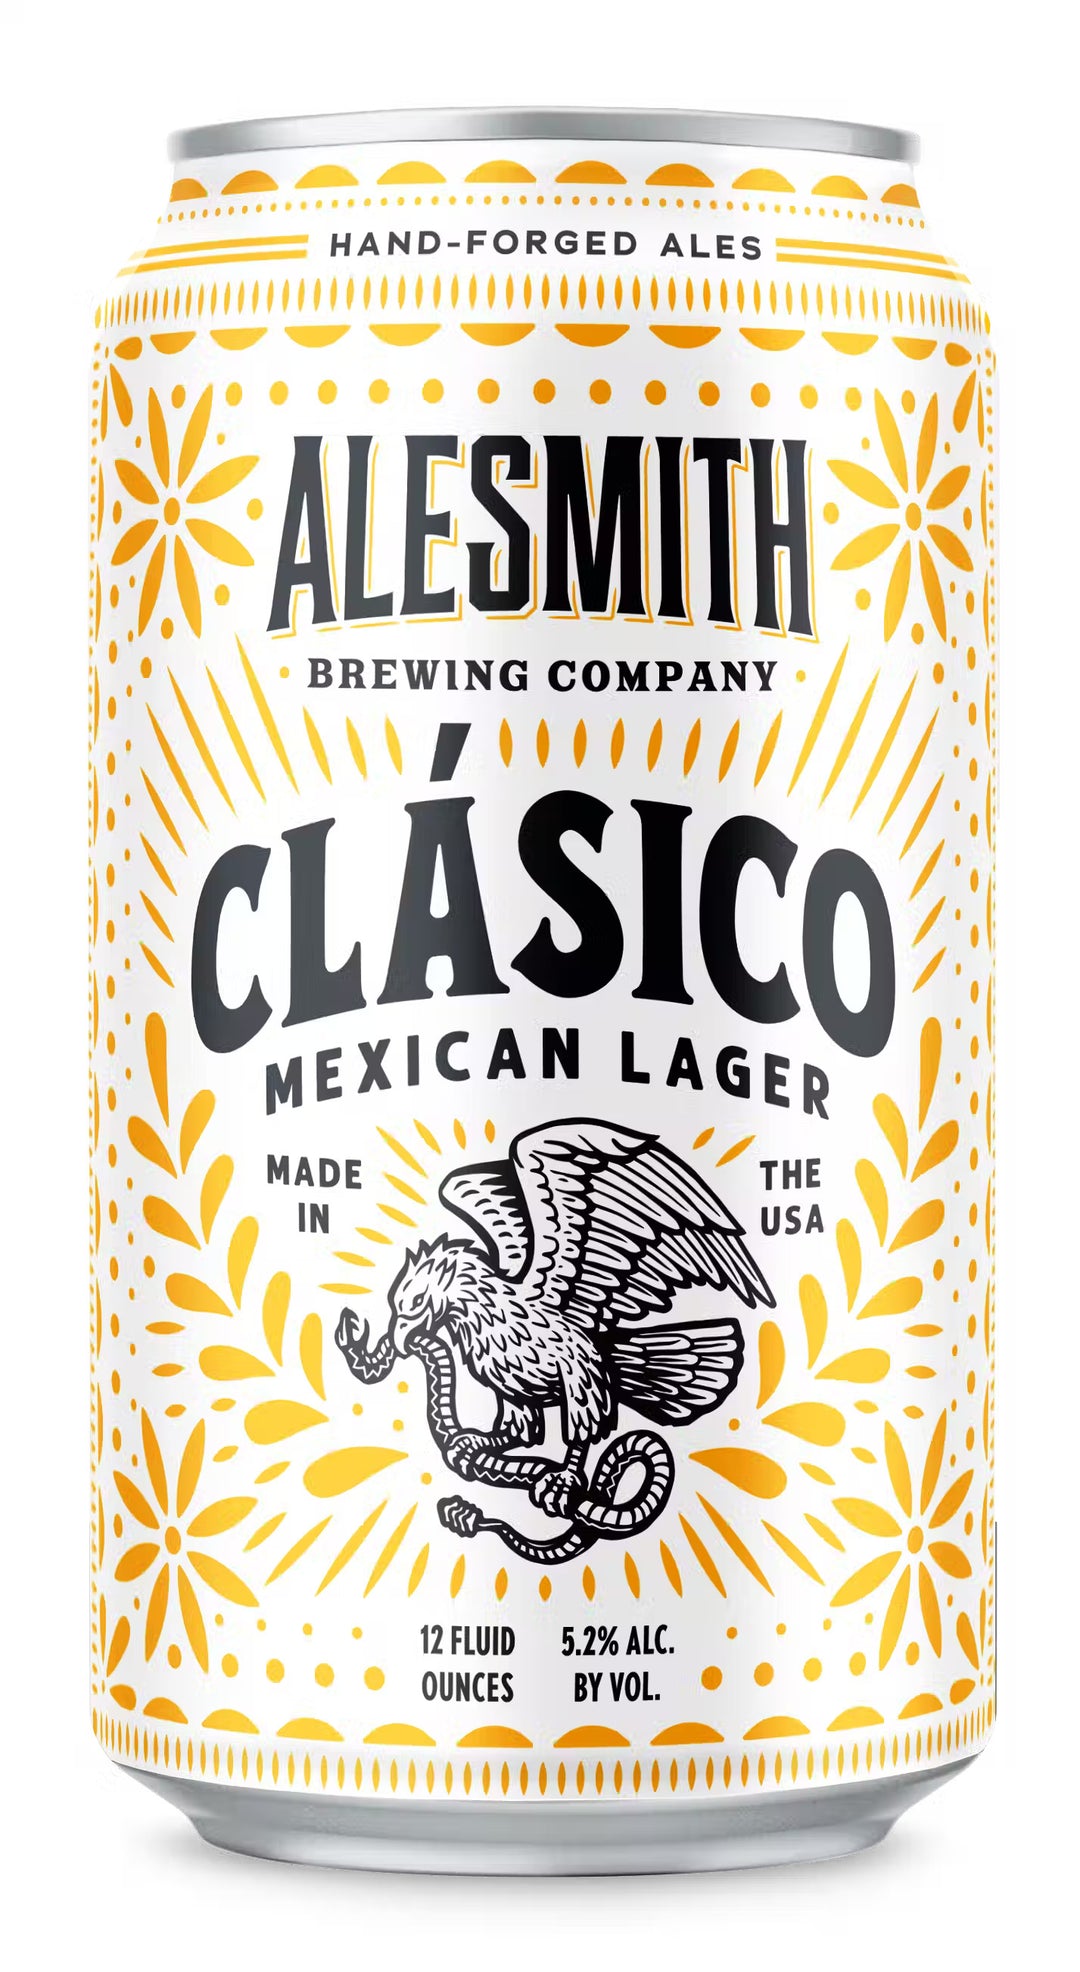 AleSmith Classico Mexican Lager